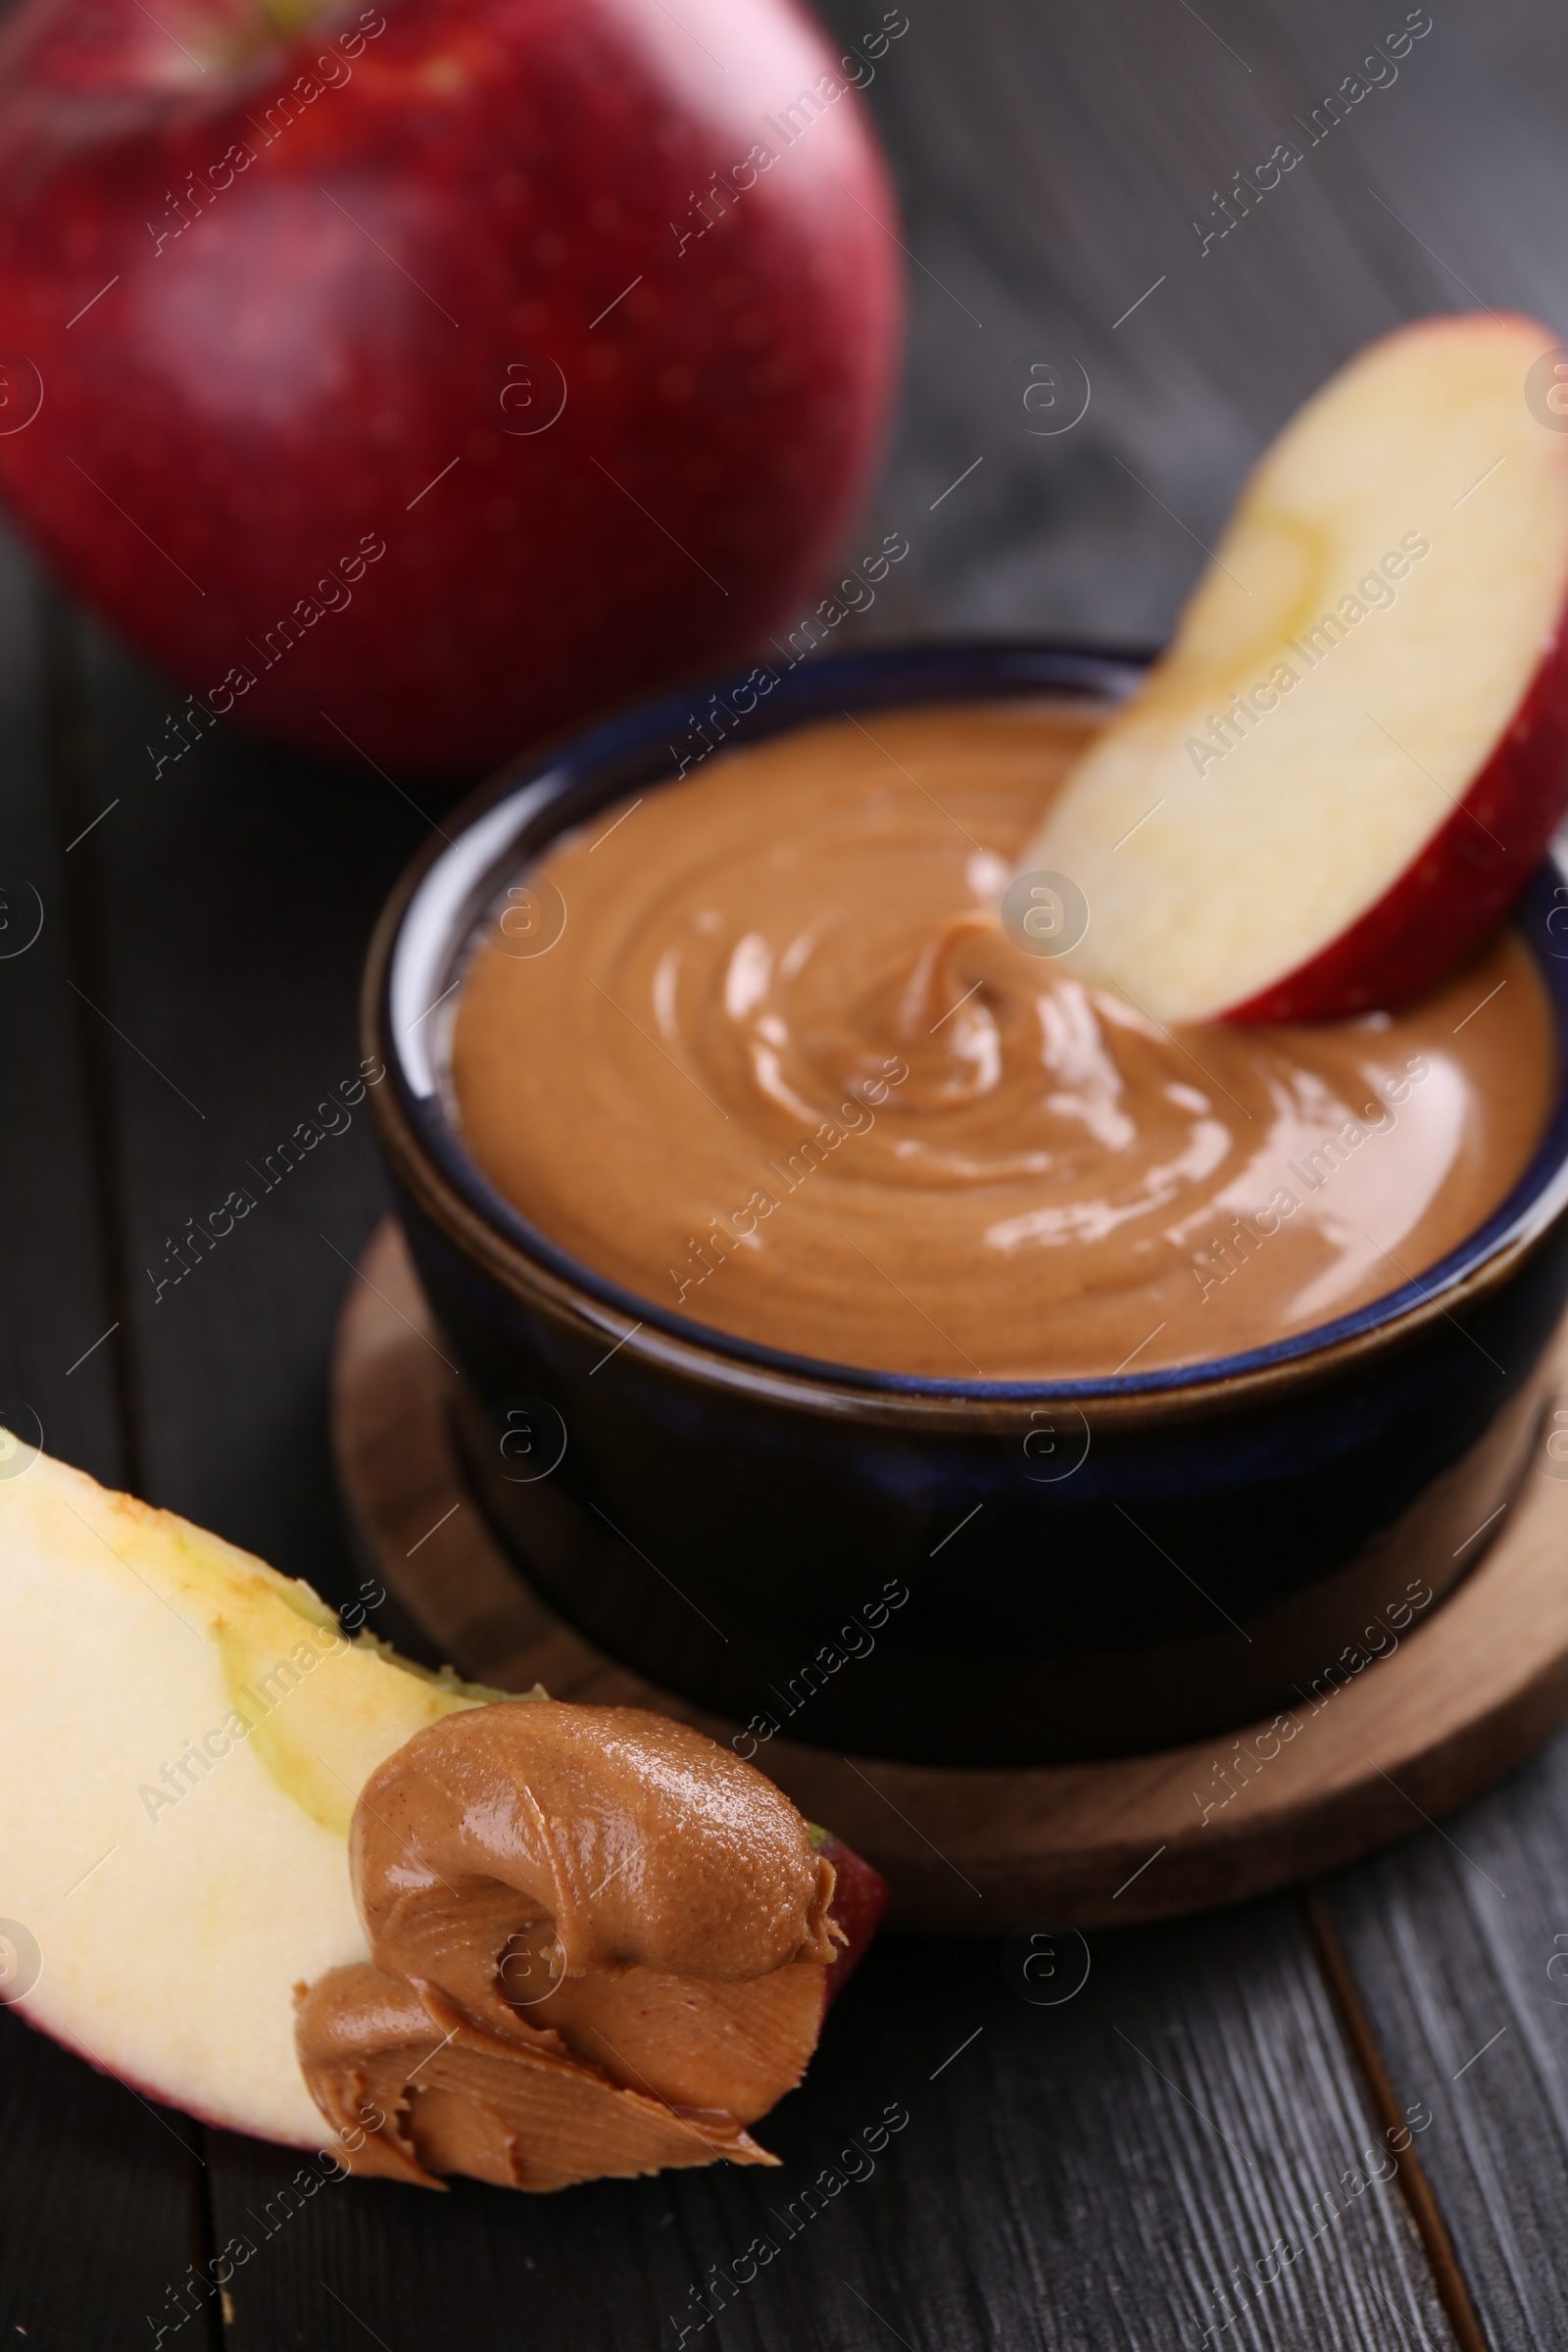 Photo of Slices of fresh apple with peanut butter on wooden table, closeup